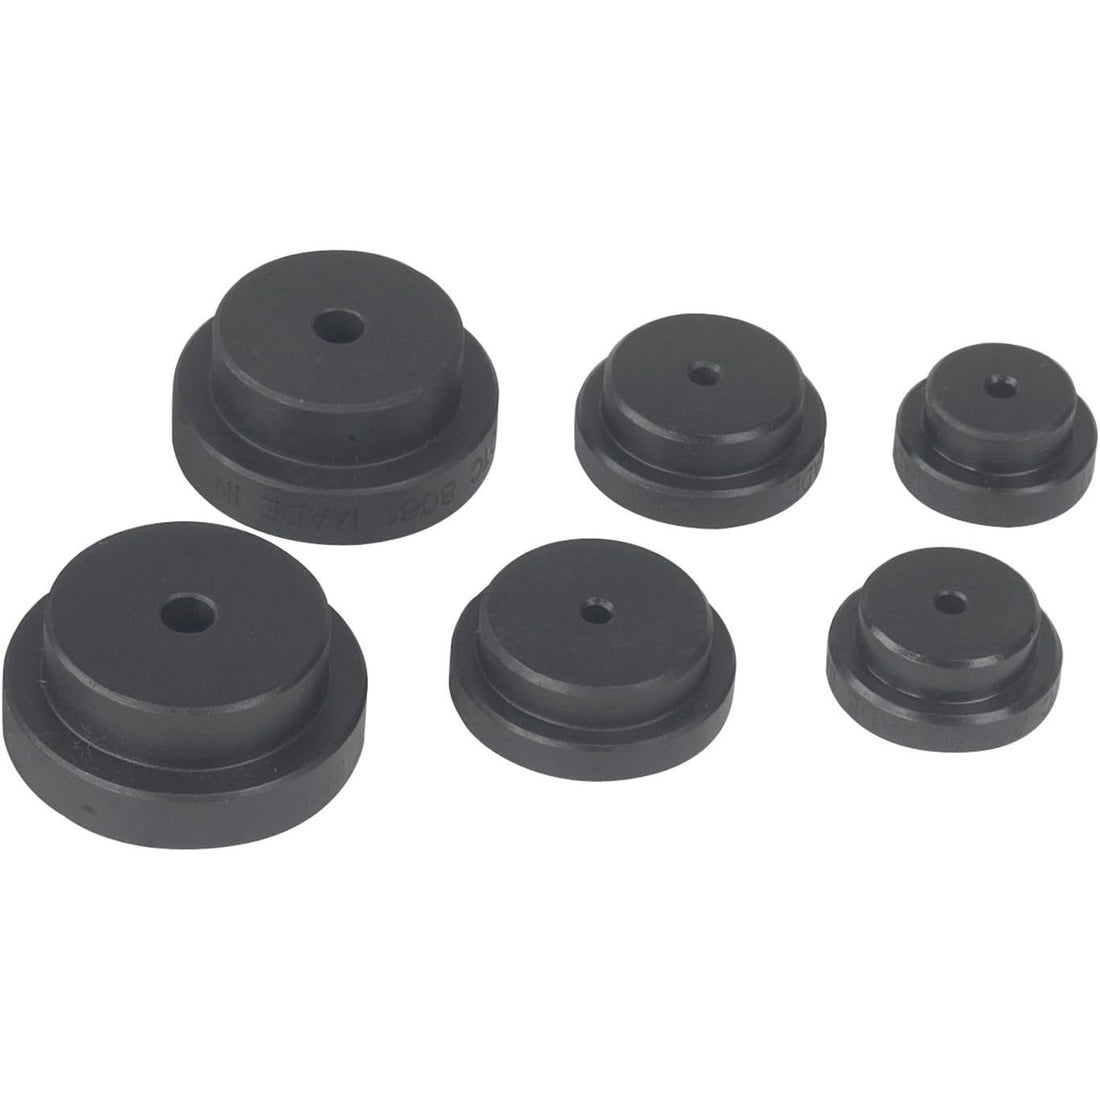 OTC 8074 6 Piece Step Plate Adapter Set- for Grip-O-Matic